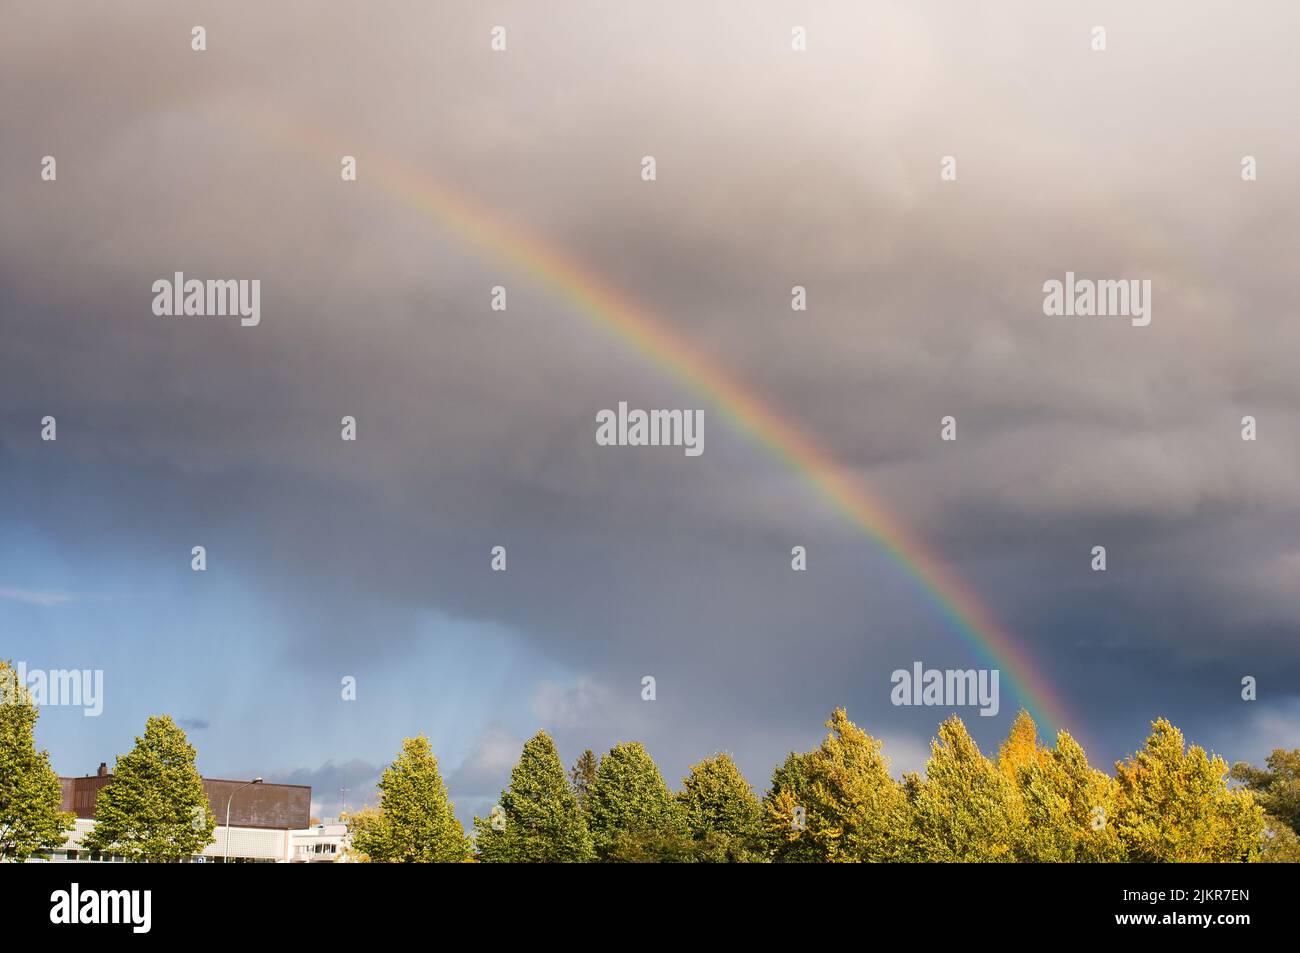 Rainbow over the tree tops, dramatic sky and clouds. Stock Photo